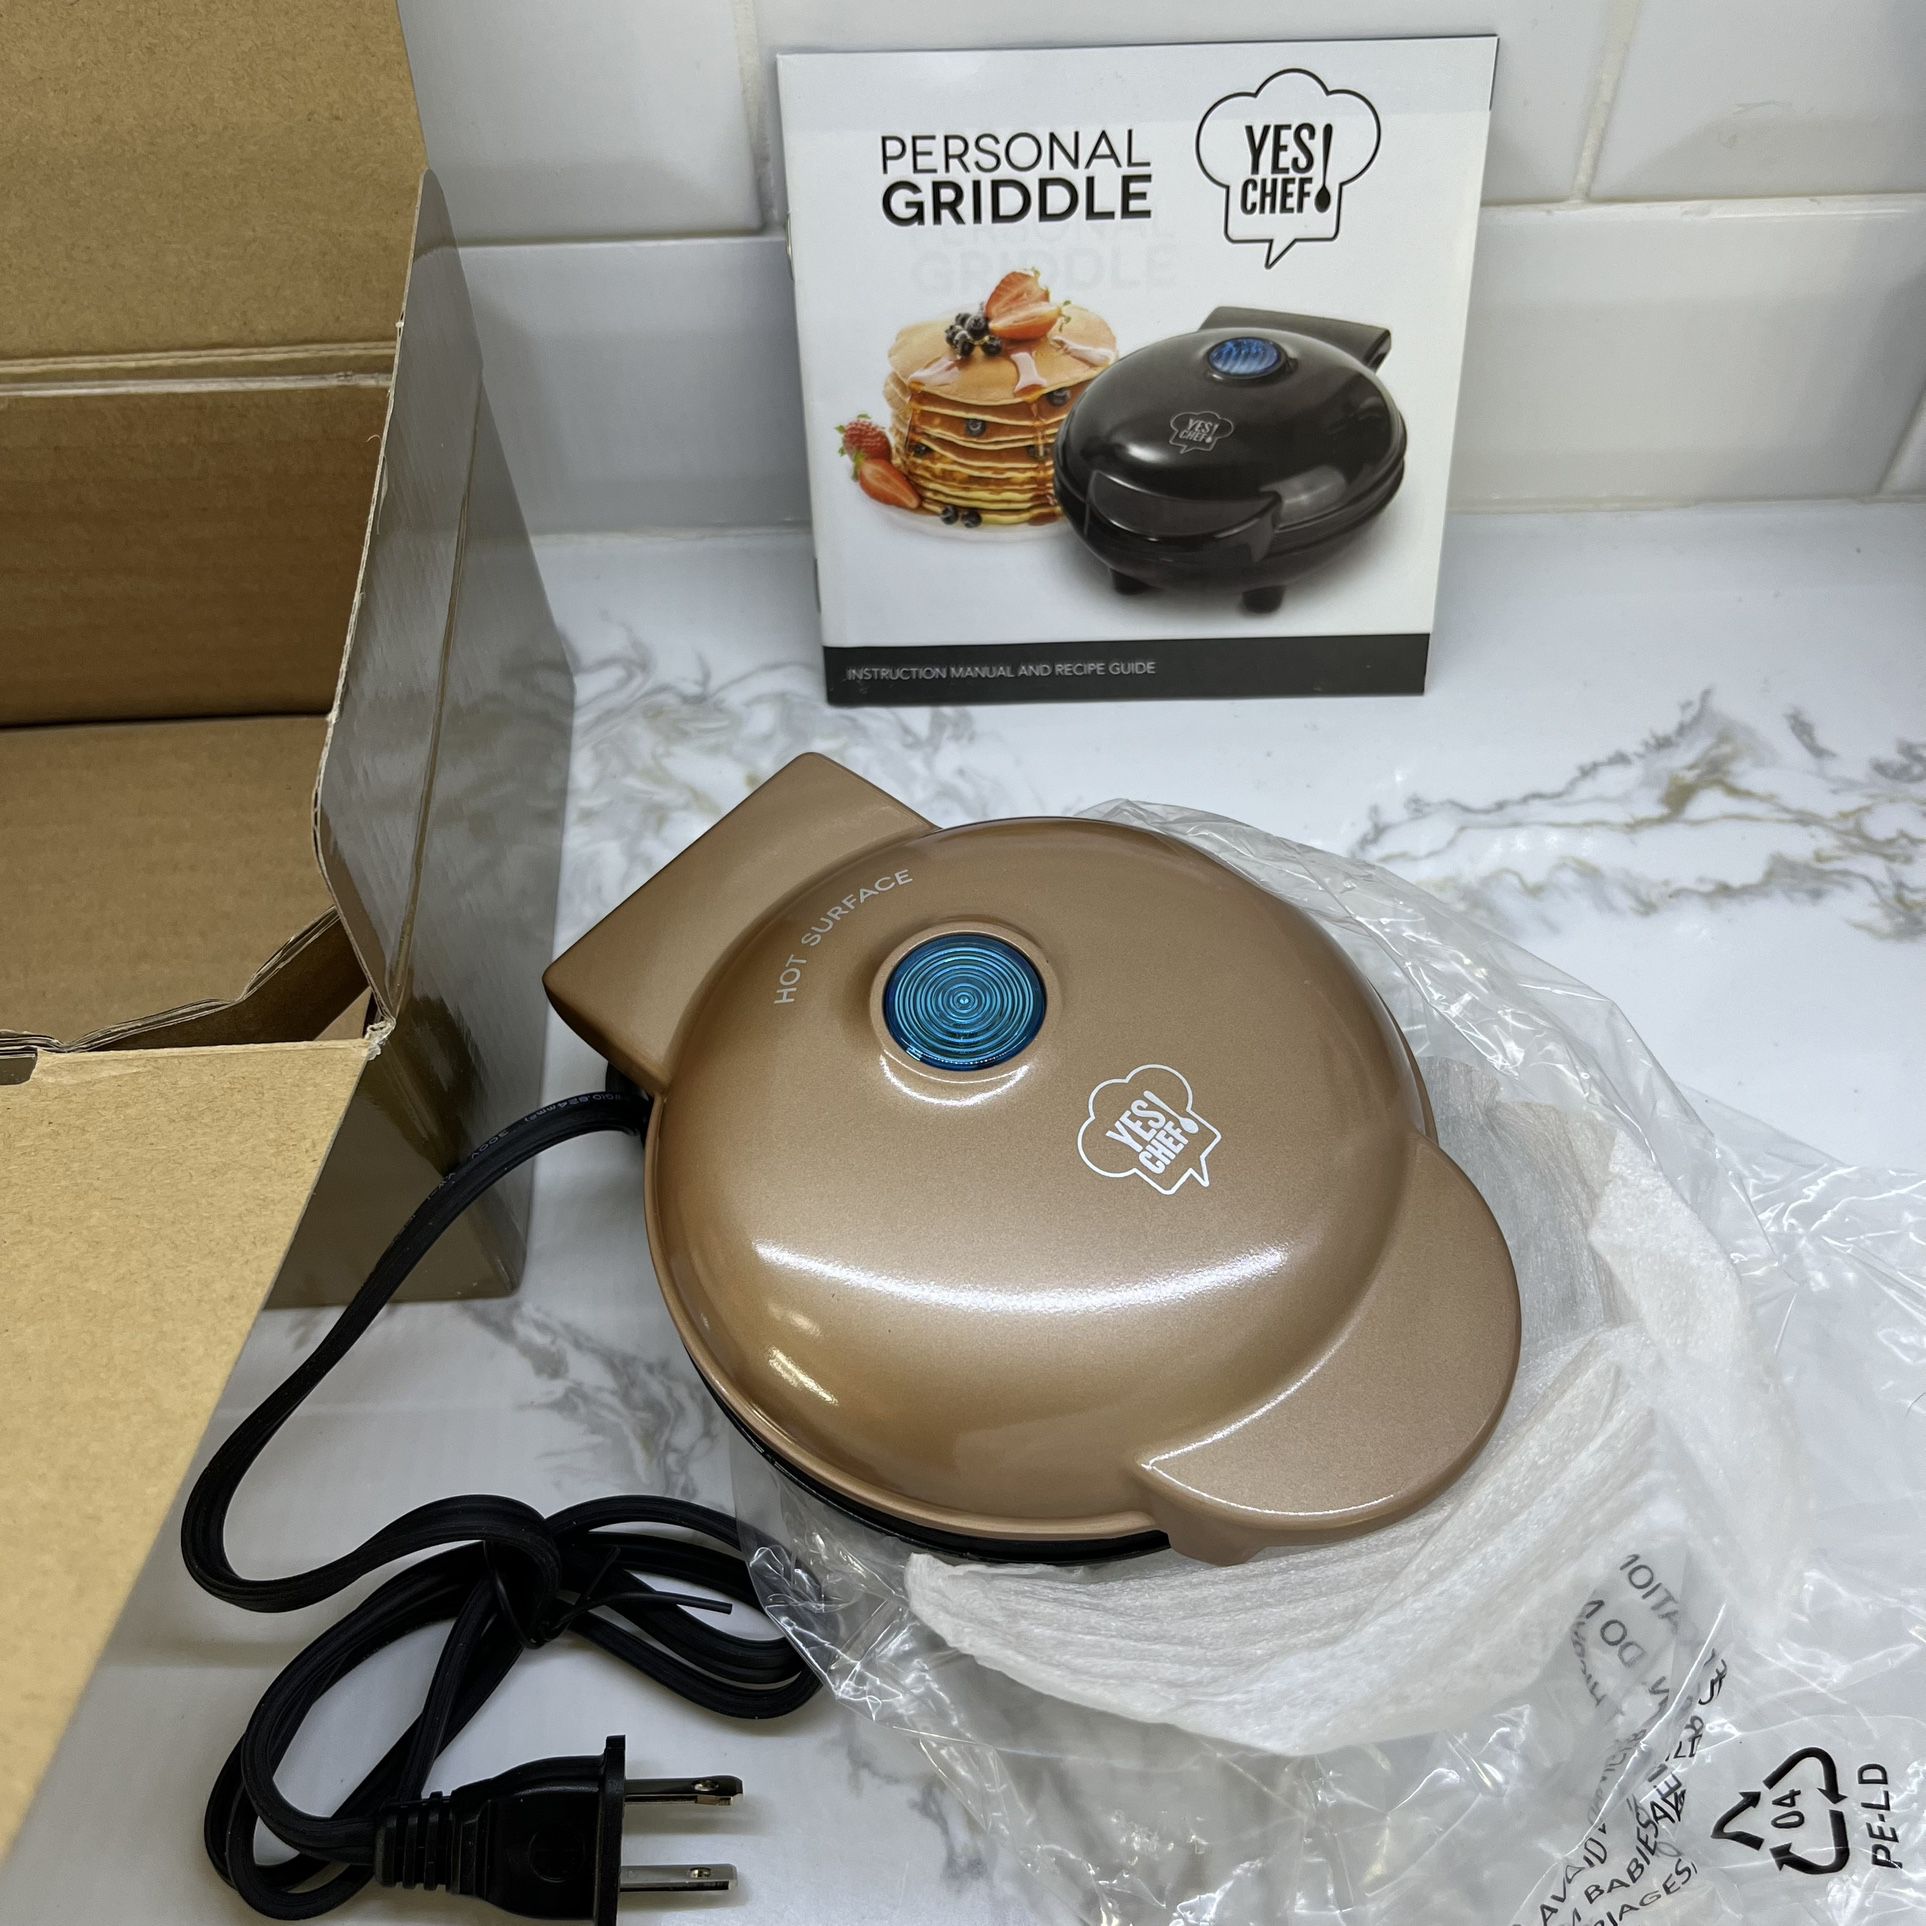 NEW IN BOX DASH Mini Maker Electric Round Griddle for Individual ...